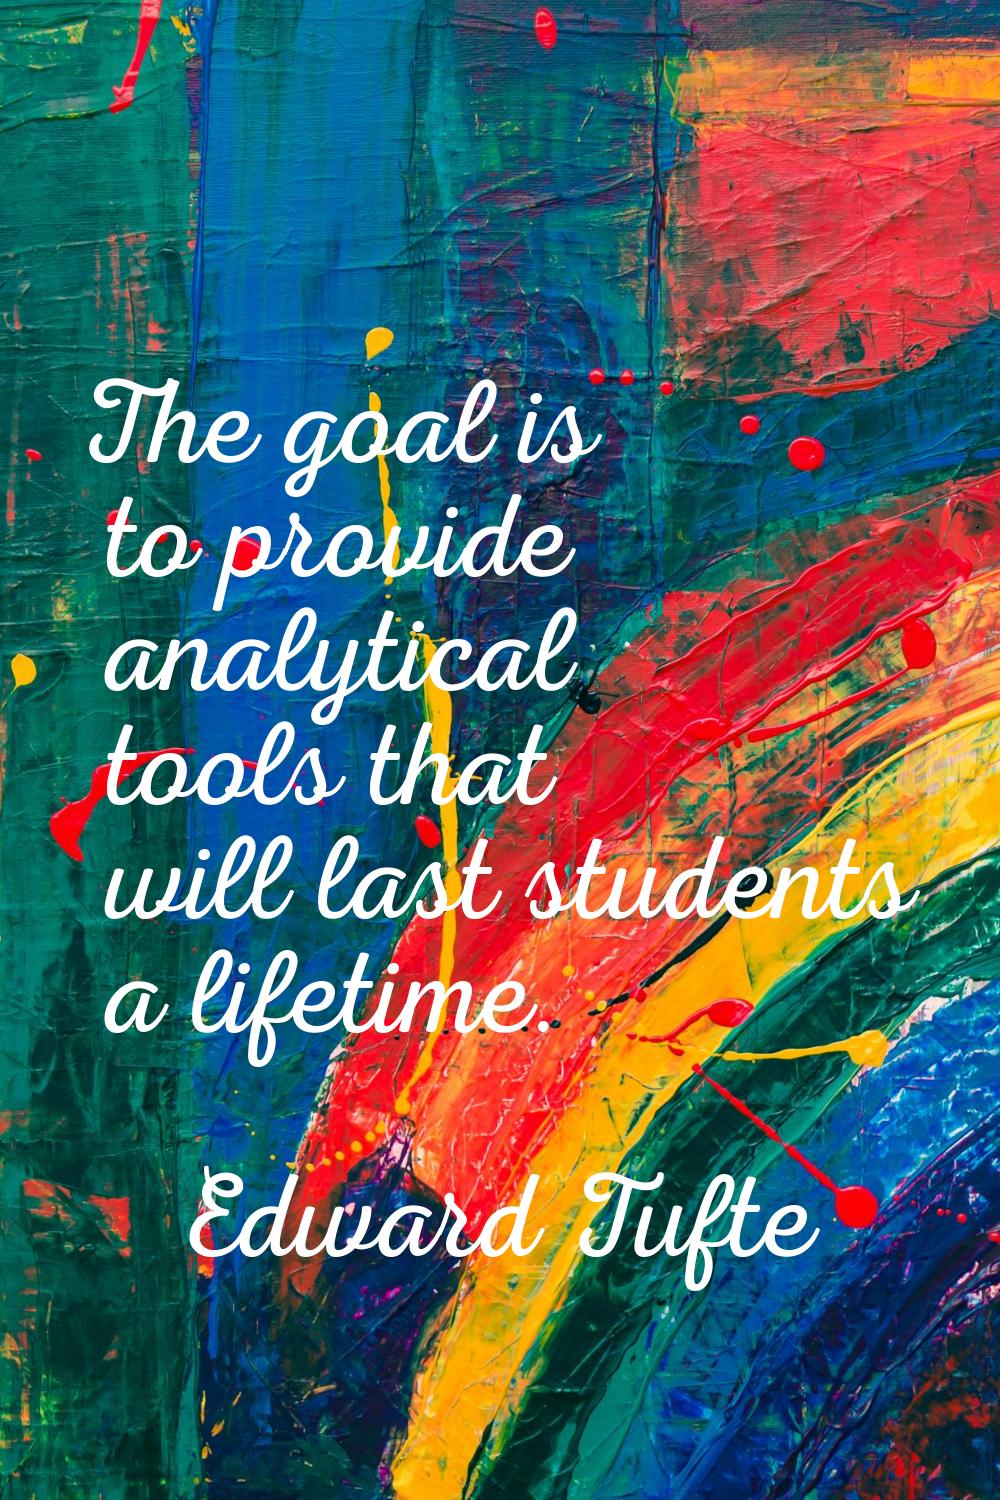 The goal is to provide analytical tools that will last students a lifetime.